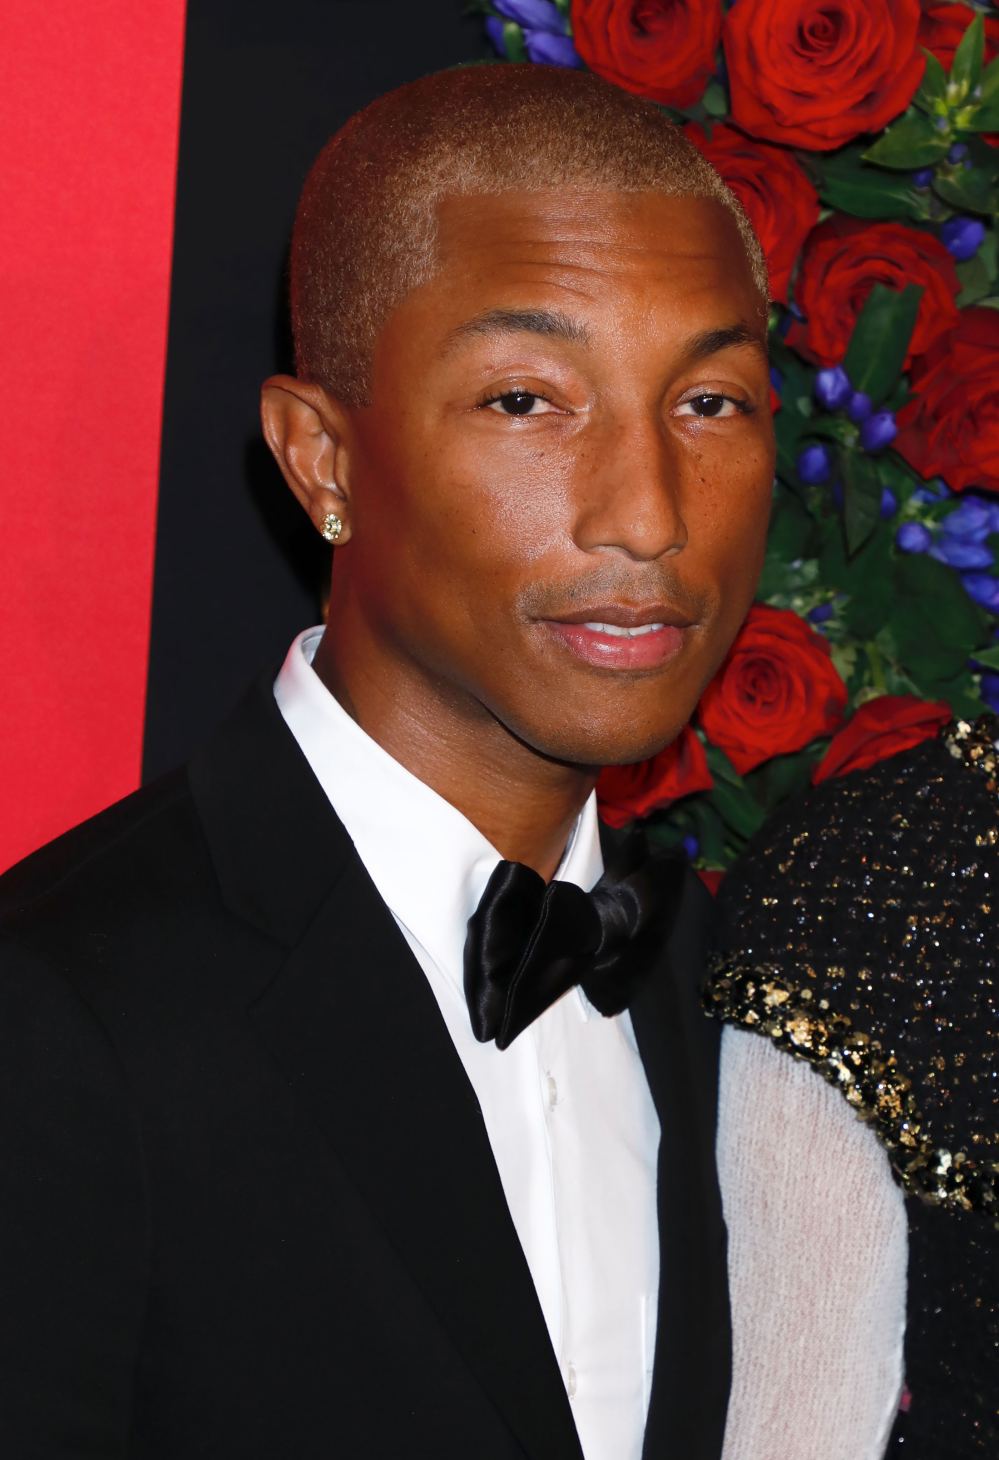 Pharrell Williams Is Getting in the Beauty Business